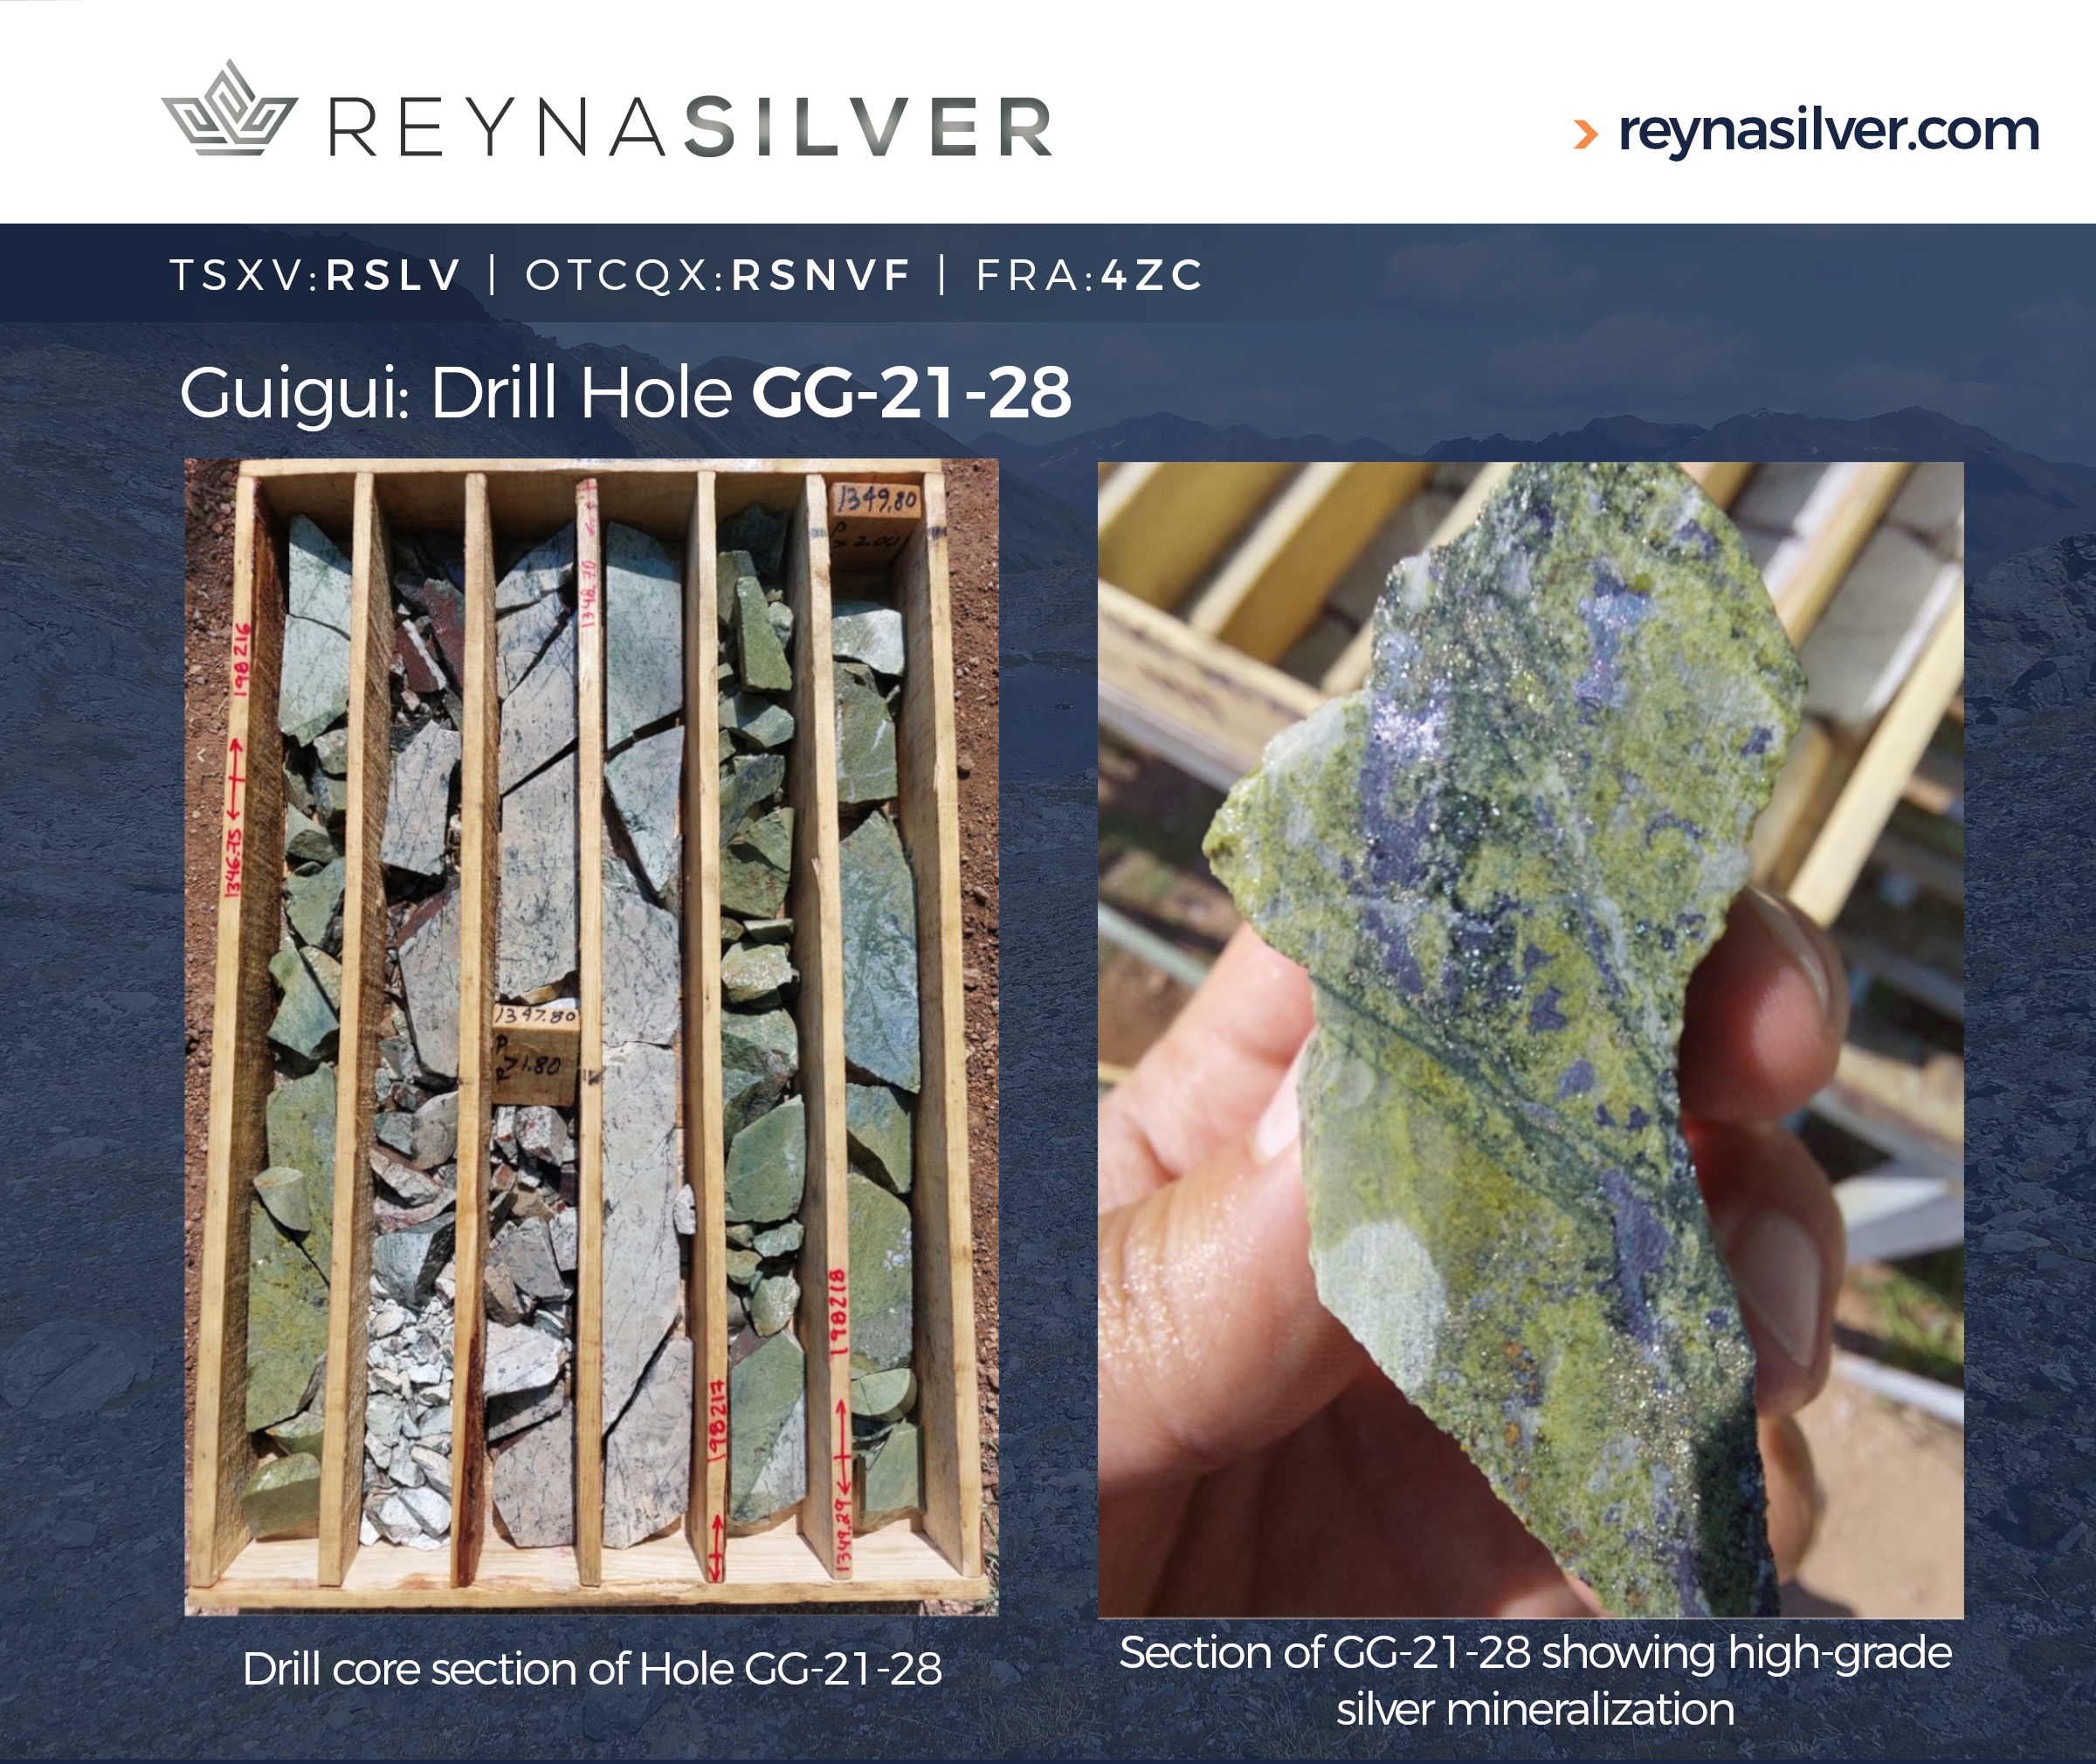 Phase 1 drilling program at Guigui discovered not only the largest intrusive ever found in the district, but it’s the first mineralized skarn ever seen in Guigui!